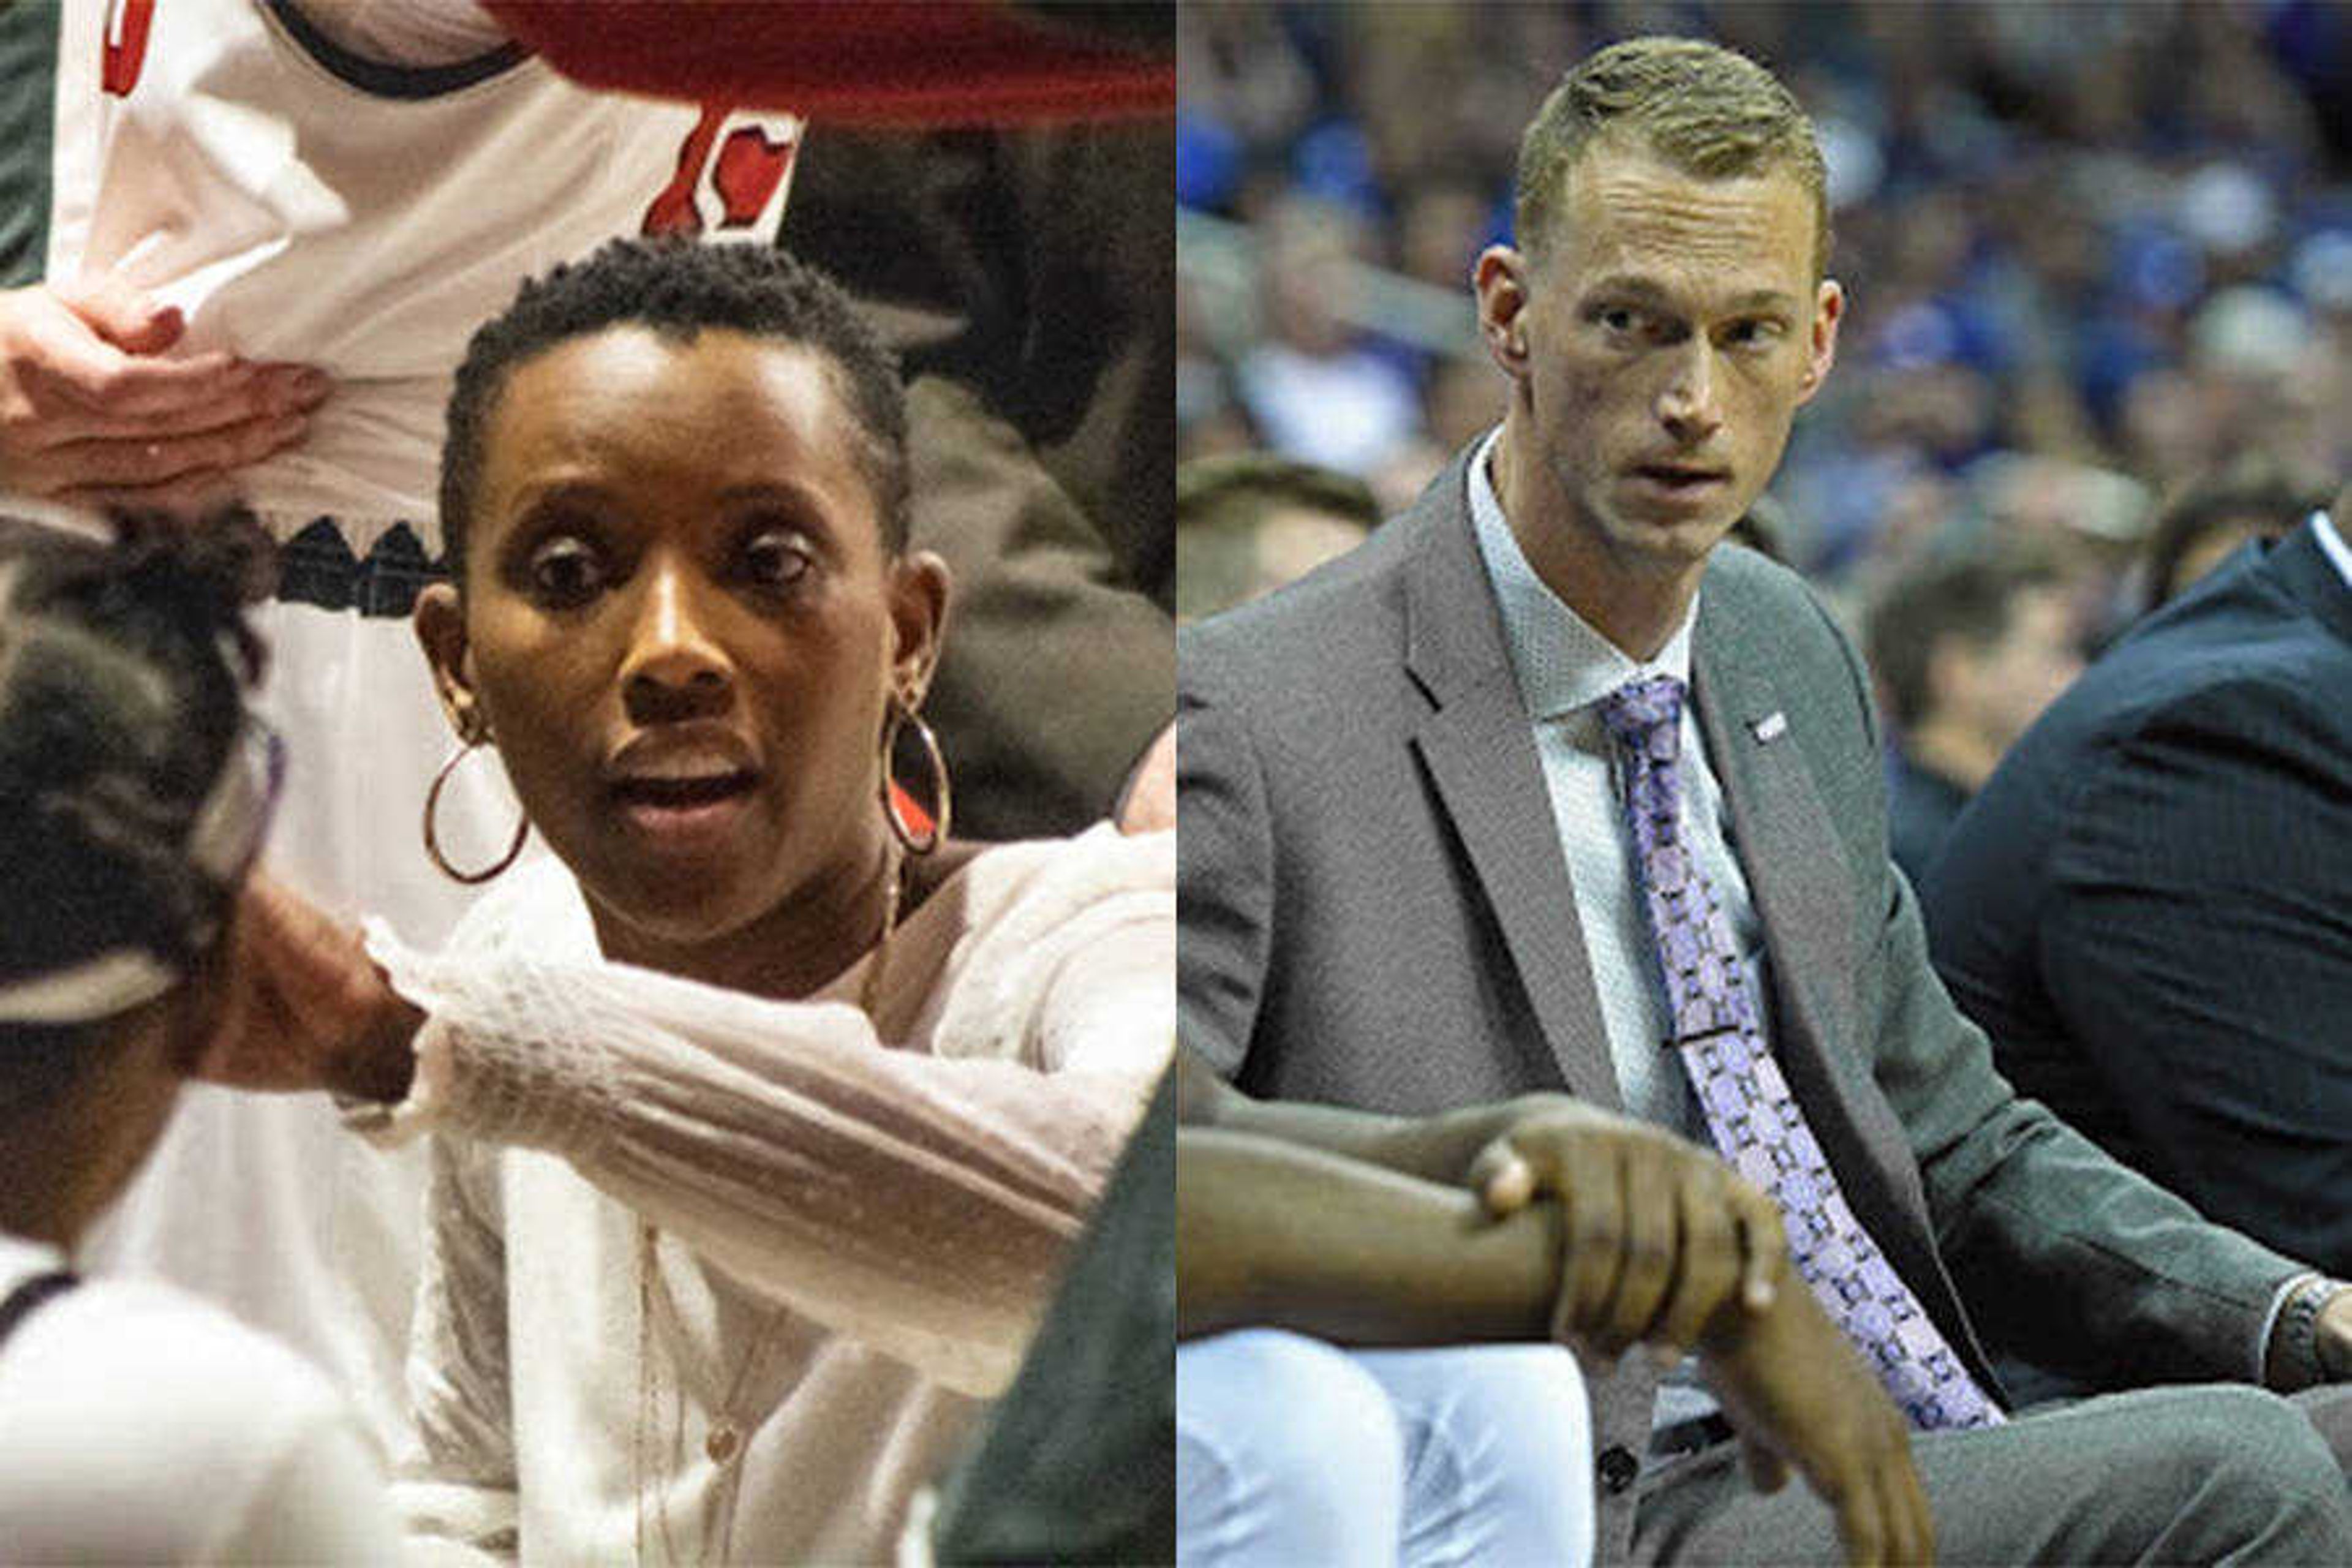 Rekha Patterson (left) coaches her team during a timeout. Brad Korn (right) instructs his players as an assistant coach at Kansas State.